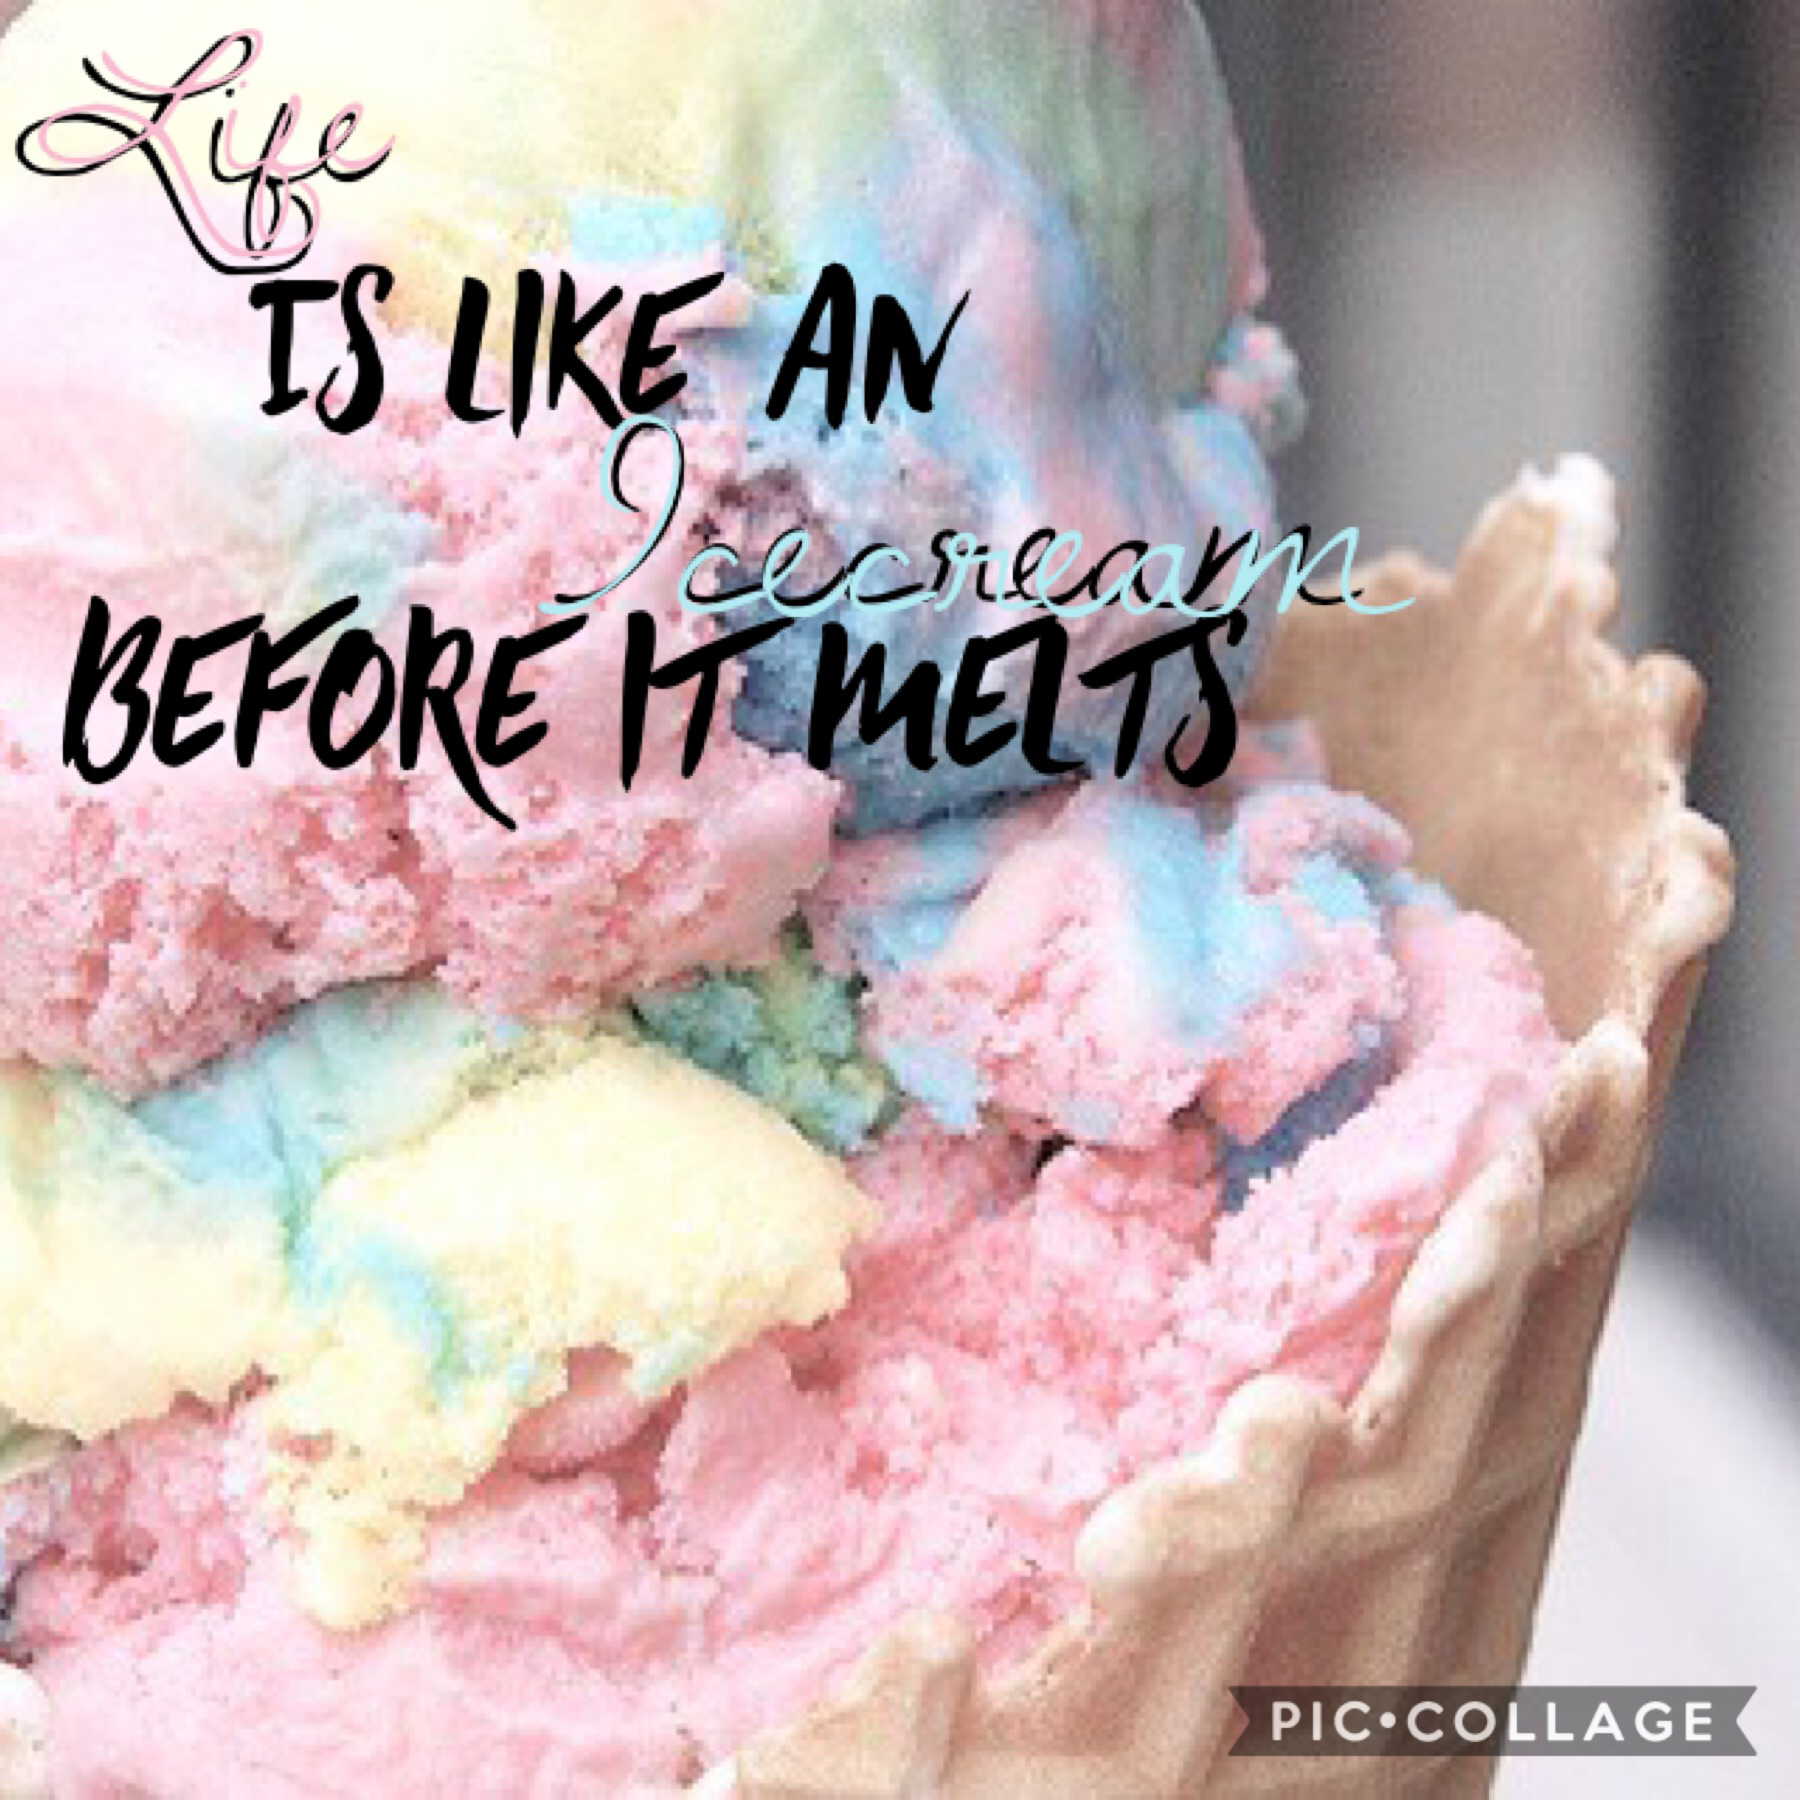 Life is like an icecream before it melts.